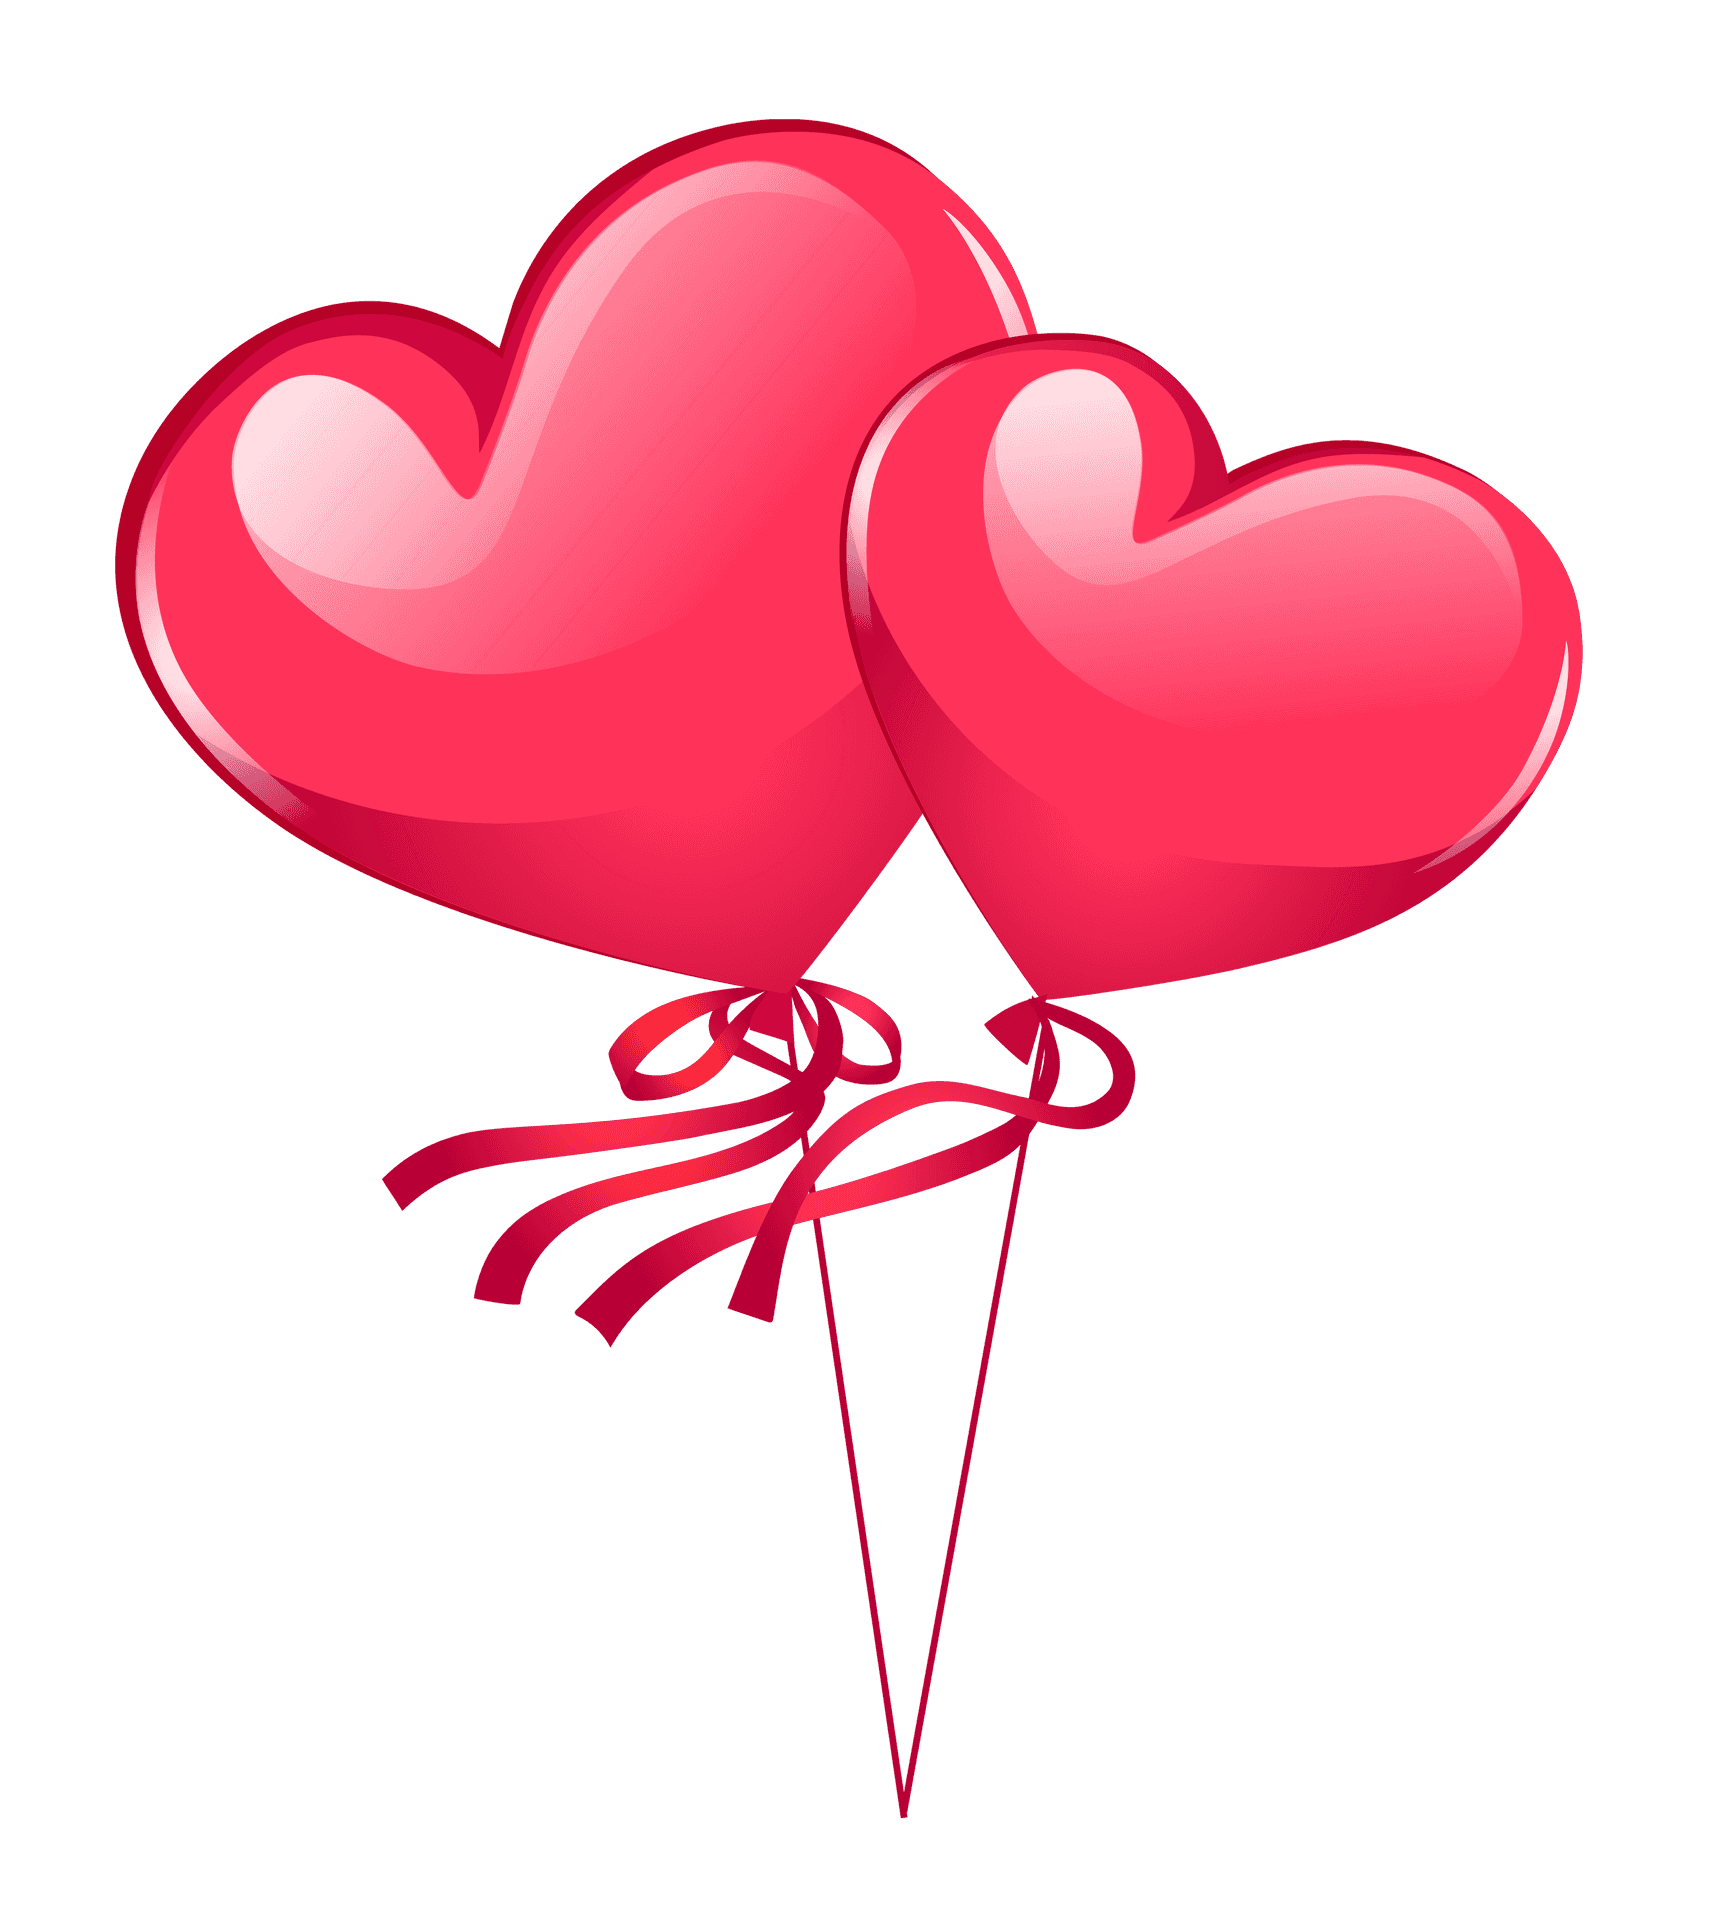 Red Heart Balloons Illustration PNG